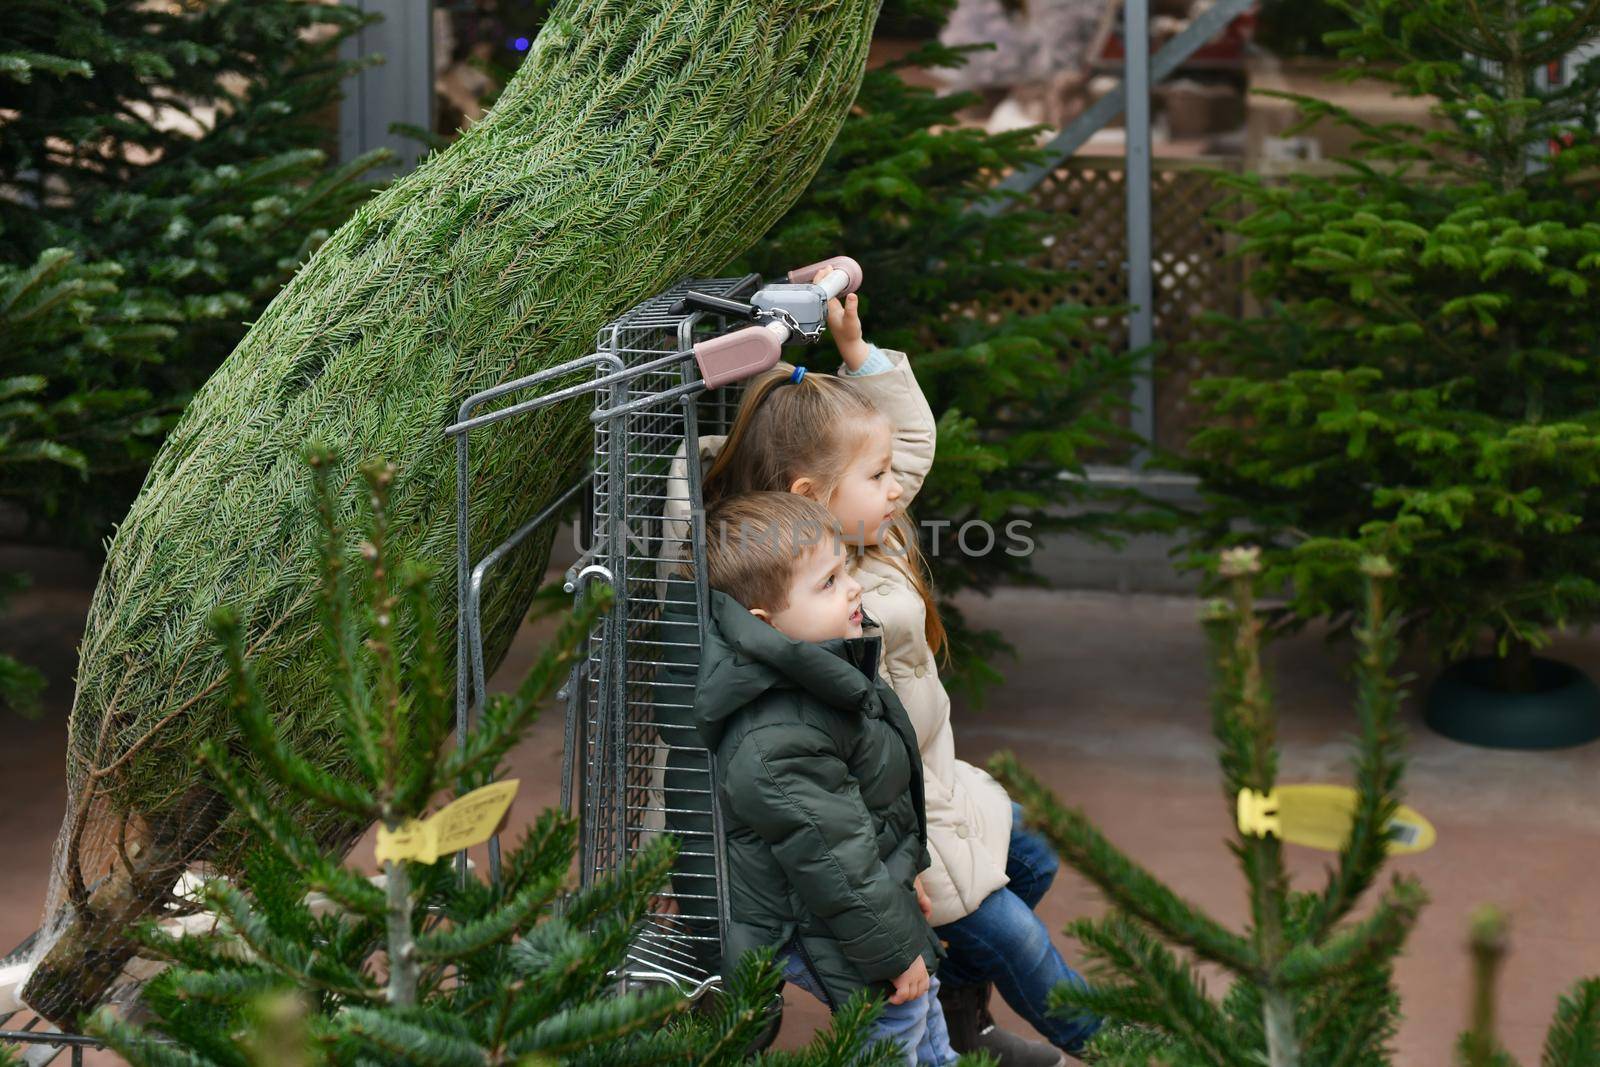 Sister and brother choose a Christmas tree in the market.